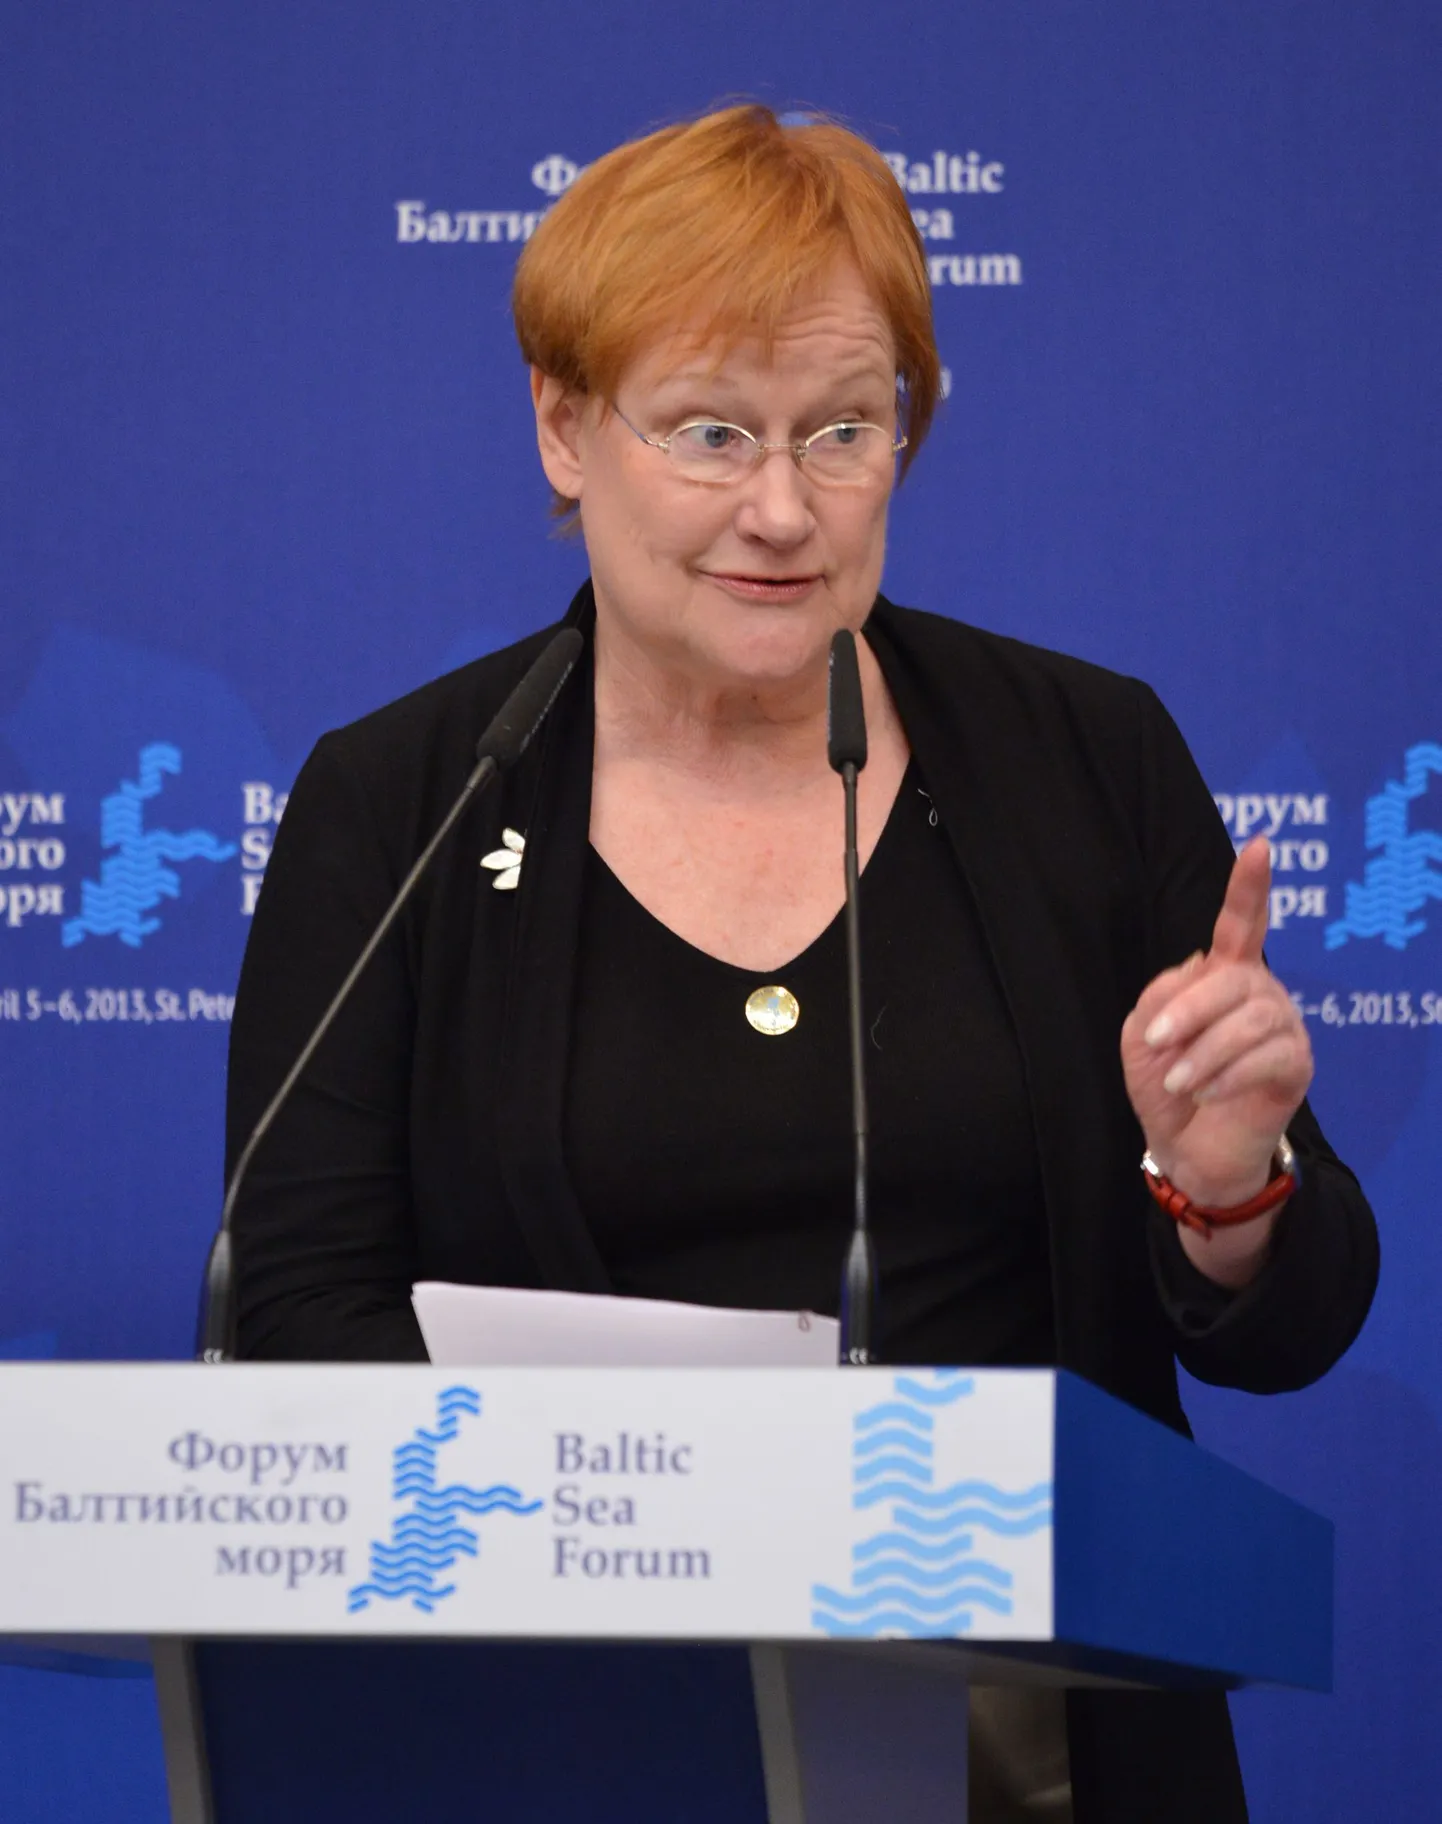 ITAR-TASS: ST PETERSBURG, RUSSIA. APRIL 5, 2013. Finland's former president Tarja Halonen addresses a conference of the leaders of Baltic Sea nations at the 2013 Baltic Sea Forum. (Photo ITAR-TASS/ Yuri Belinsky)